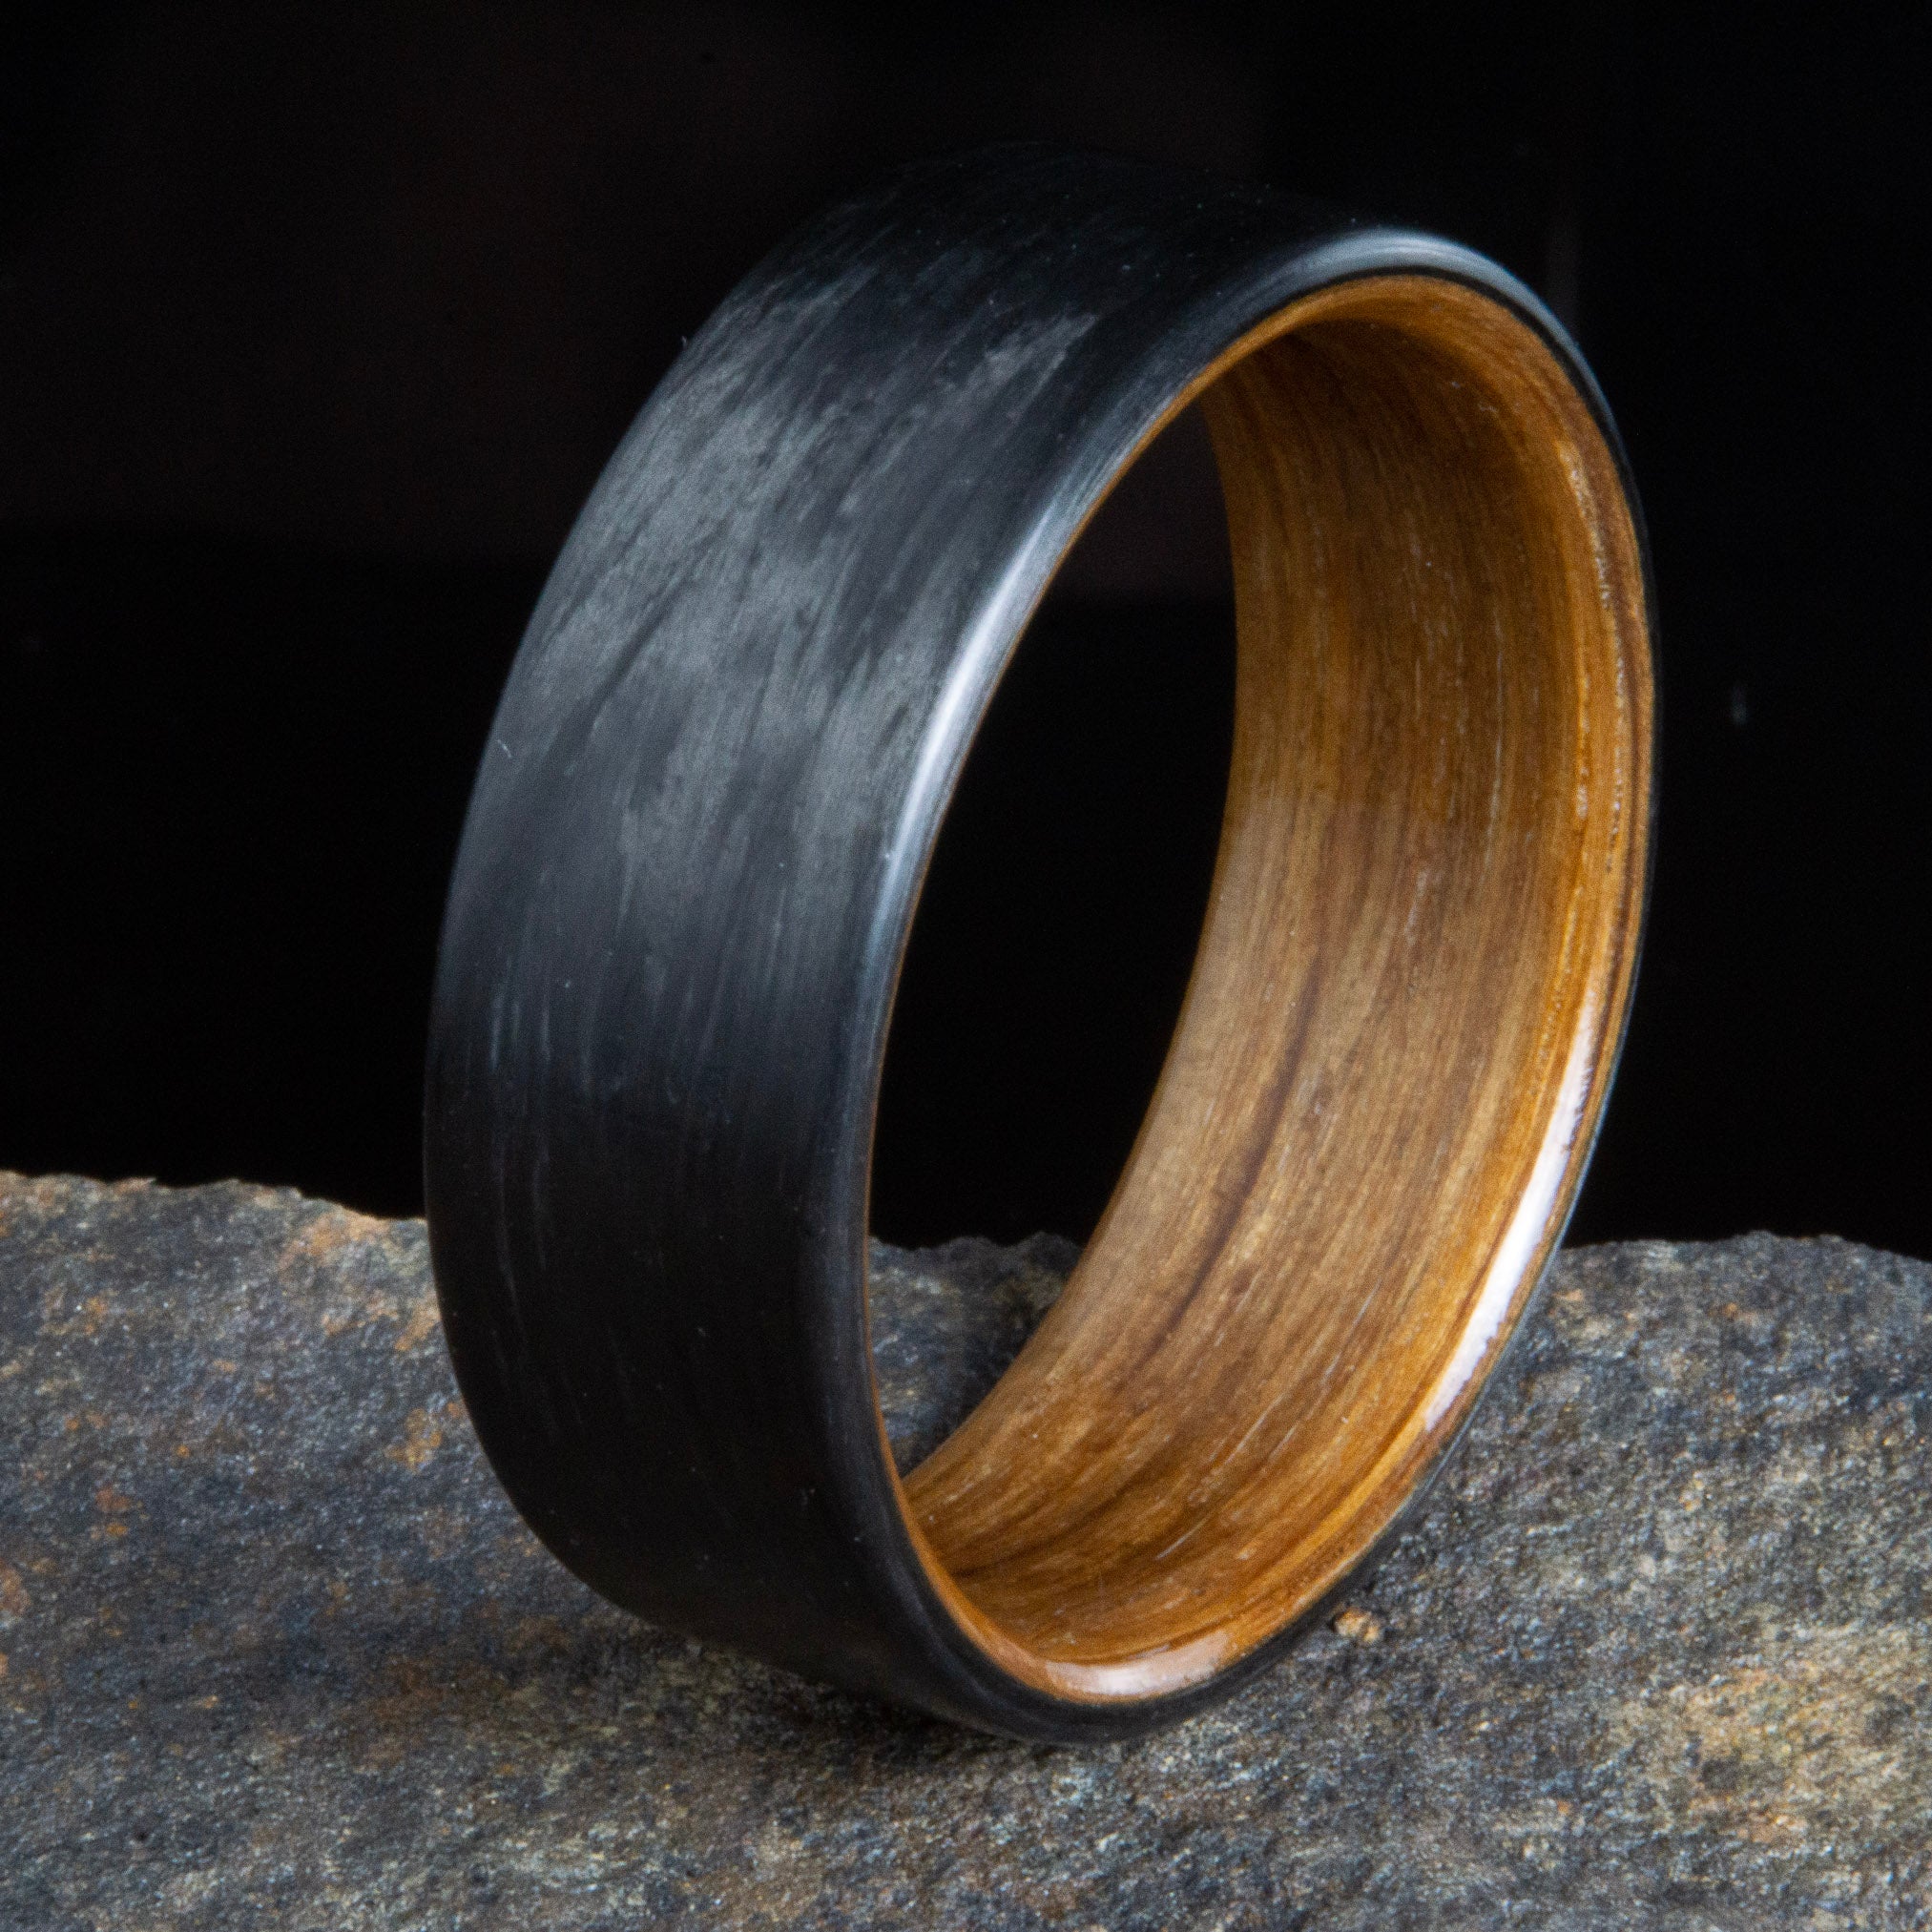 "The Rustic" Carbon fiber ring with barn wood, rustic rings for men